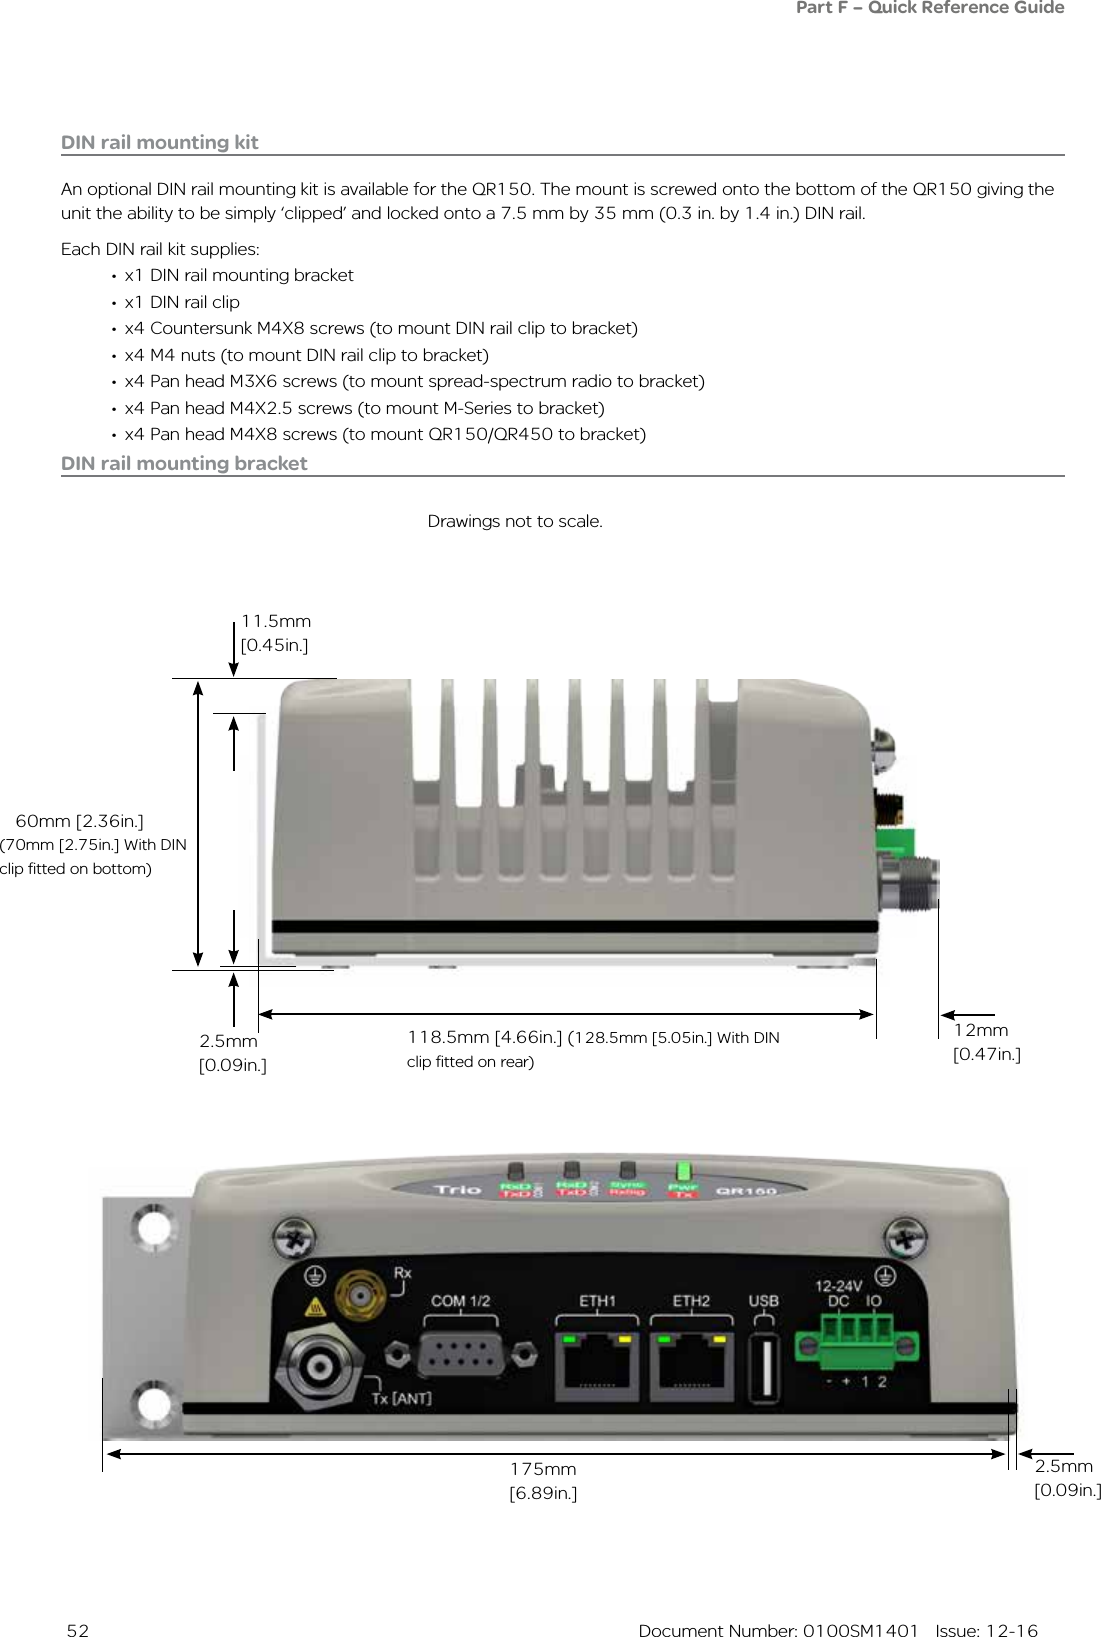  52  Document Number: 0100SM1401   Issue: 12-16Part F – Quick Reference Guide DIN rail mounting kitAn optional DIN rail mounting kit is available for the QR150. The mount is screwed onto the bottom of the QR150 giving the unit the ability to be simply ‘clipped’ and locked onto a 7.5 mm by 35 mm (0.3 in. by 1.4 in.) DIN rail.Each DIN rail kit supplies:•  x1 DIN rail mounting bracket•  x1 DIN rail clip•  x4 Countersunk M4X8 screws (to mount DIN rail clip to bracket)•  x4 M4 nuts (to mount DIN rail clip to bracket)•  x4 Pan head M3X6 screws (to mount spread-spectrum radio to bracket)•  x4 Pan head M4X2.5 screws (to mount M-Series to bracket)•  x4 Pan head M4X8 screws (to mount QR150/QR450 to bracket)Drawings not to scale.118.5mm [4.66in.] (128.5mm [5.05in.] With DIN clip fitted on rear)12mm [0.47in.]2.5mm [0.09in.]60mm [2.36in.]175mm [6.89in.]DIN rail mounting bracket(70mm [2.75in.] With DIN clip fitted on bottom)2.5mm [0.09in.]11.5mm [0.45in.]